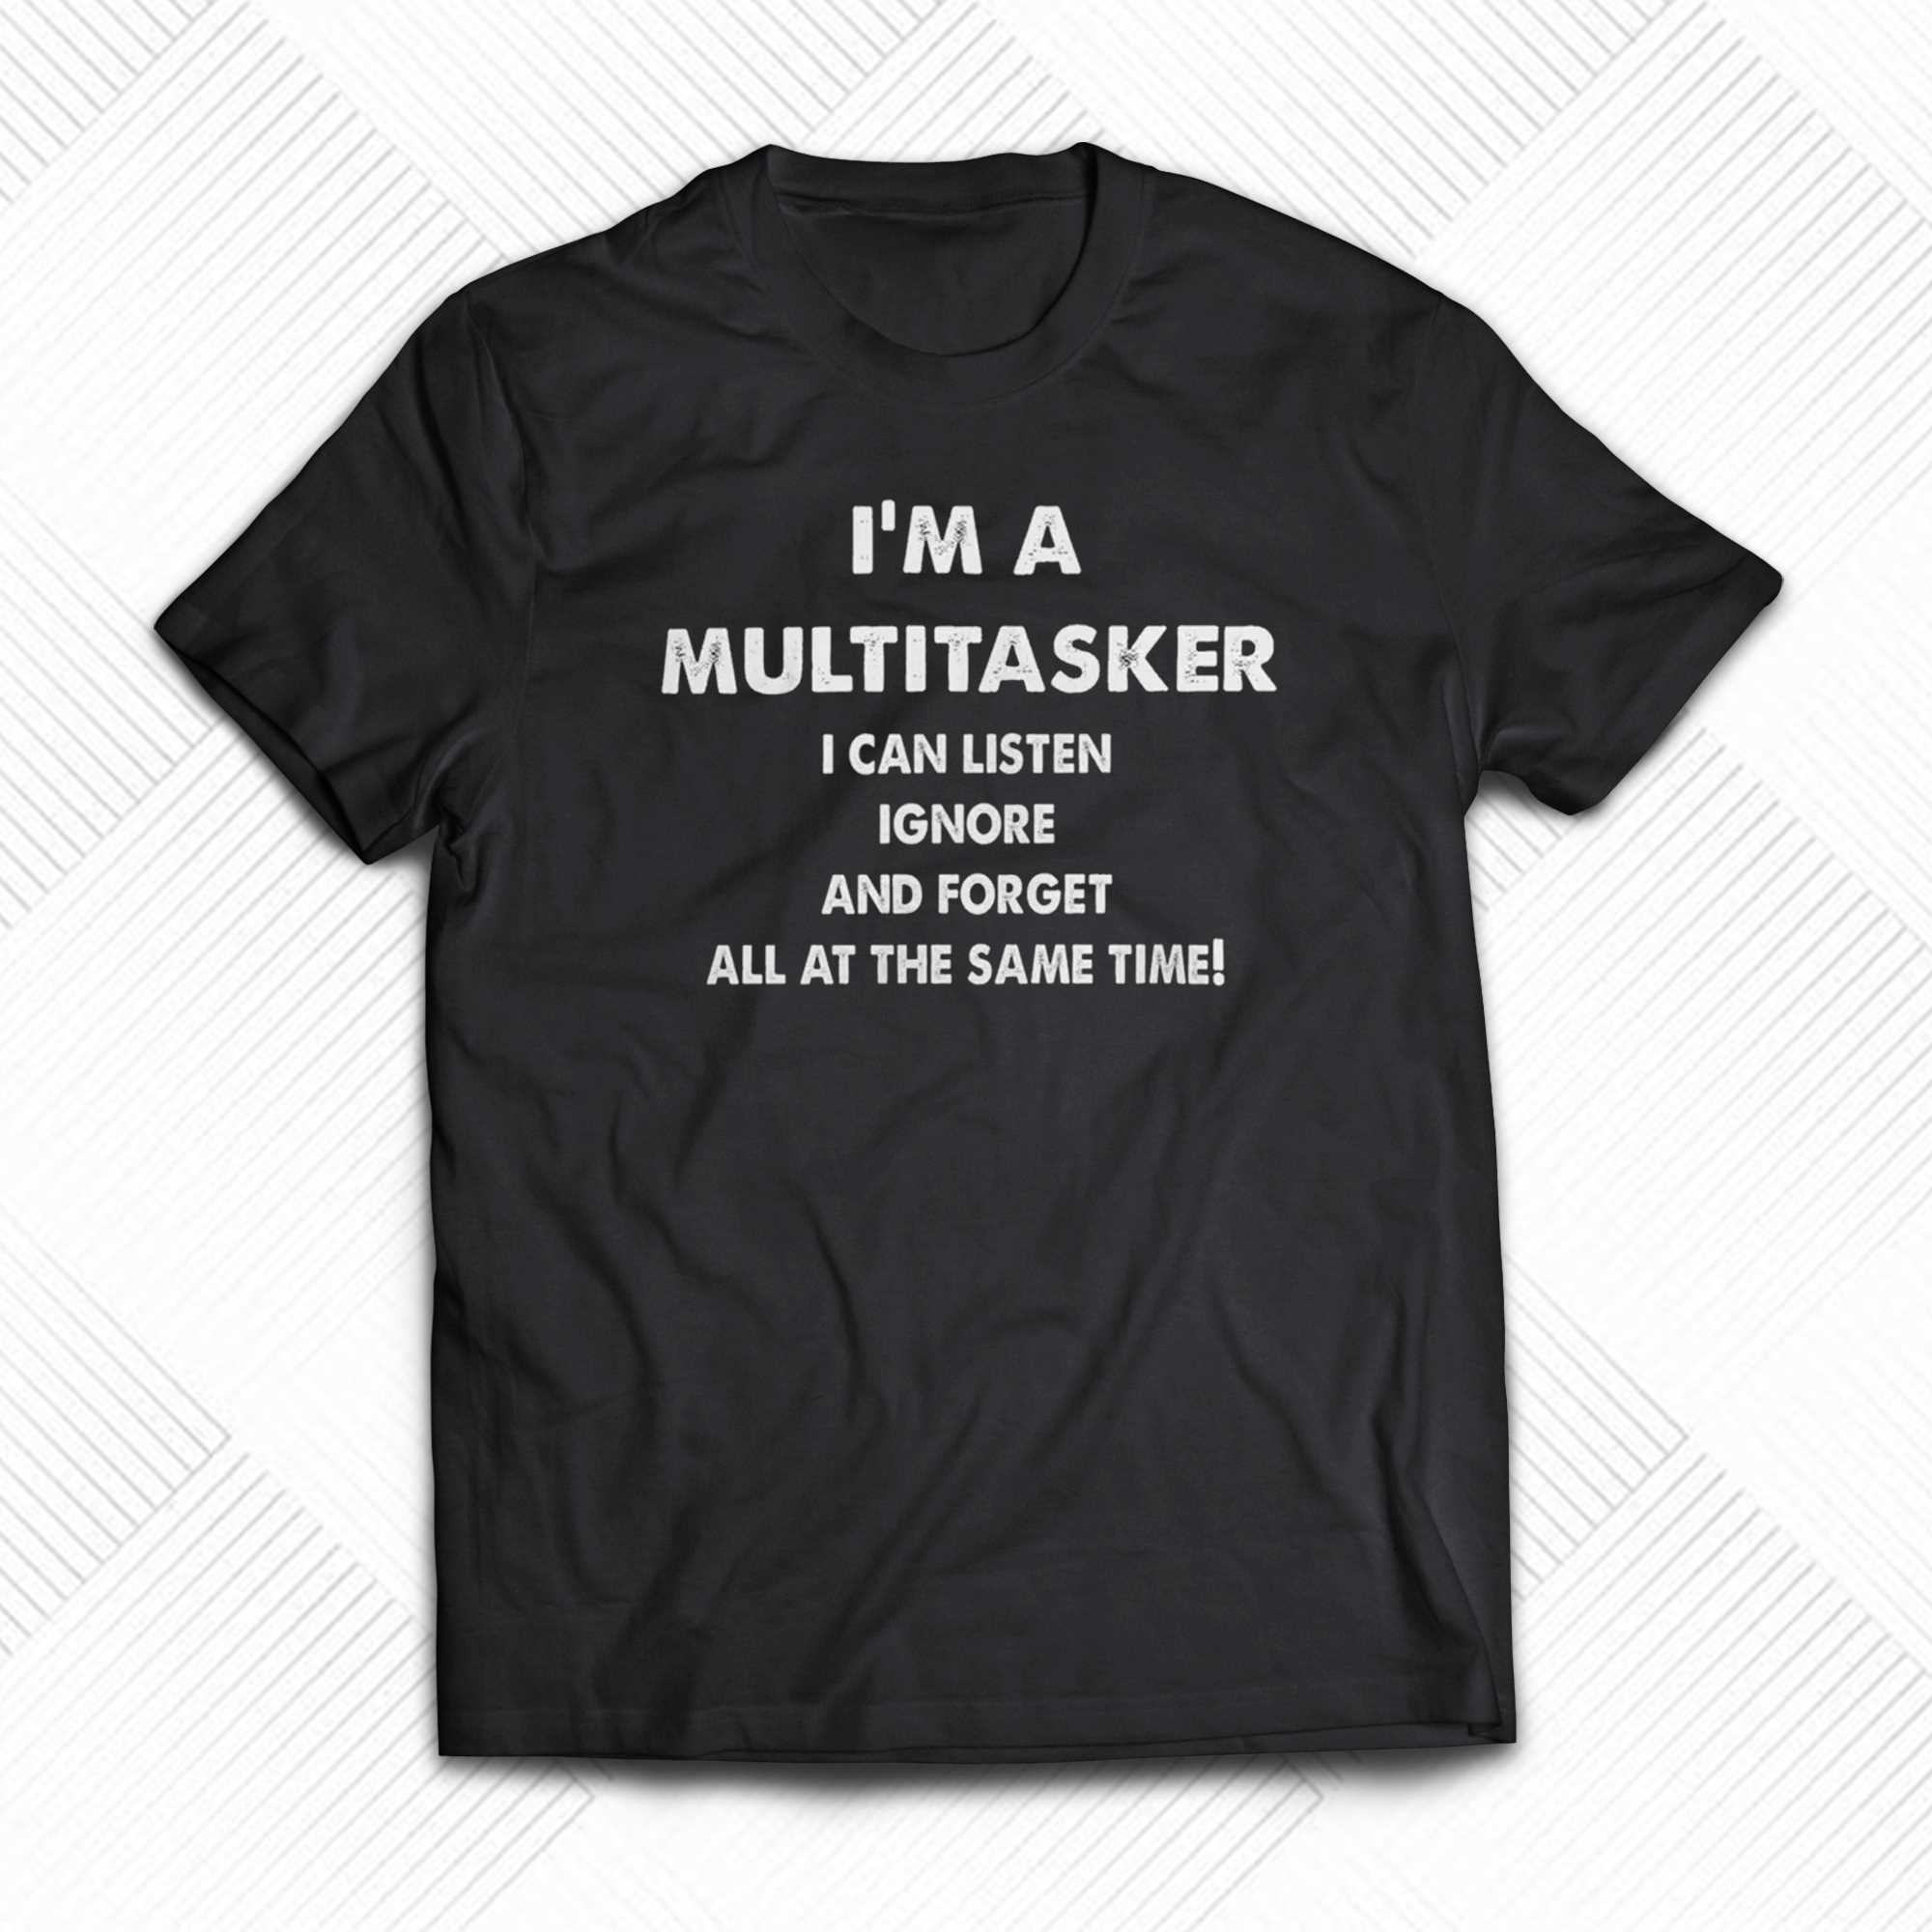 im a multitasker i can listen ignore and forget all att the same time t shirt 1 1